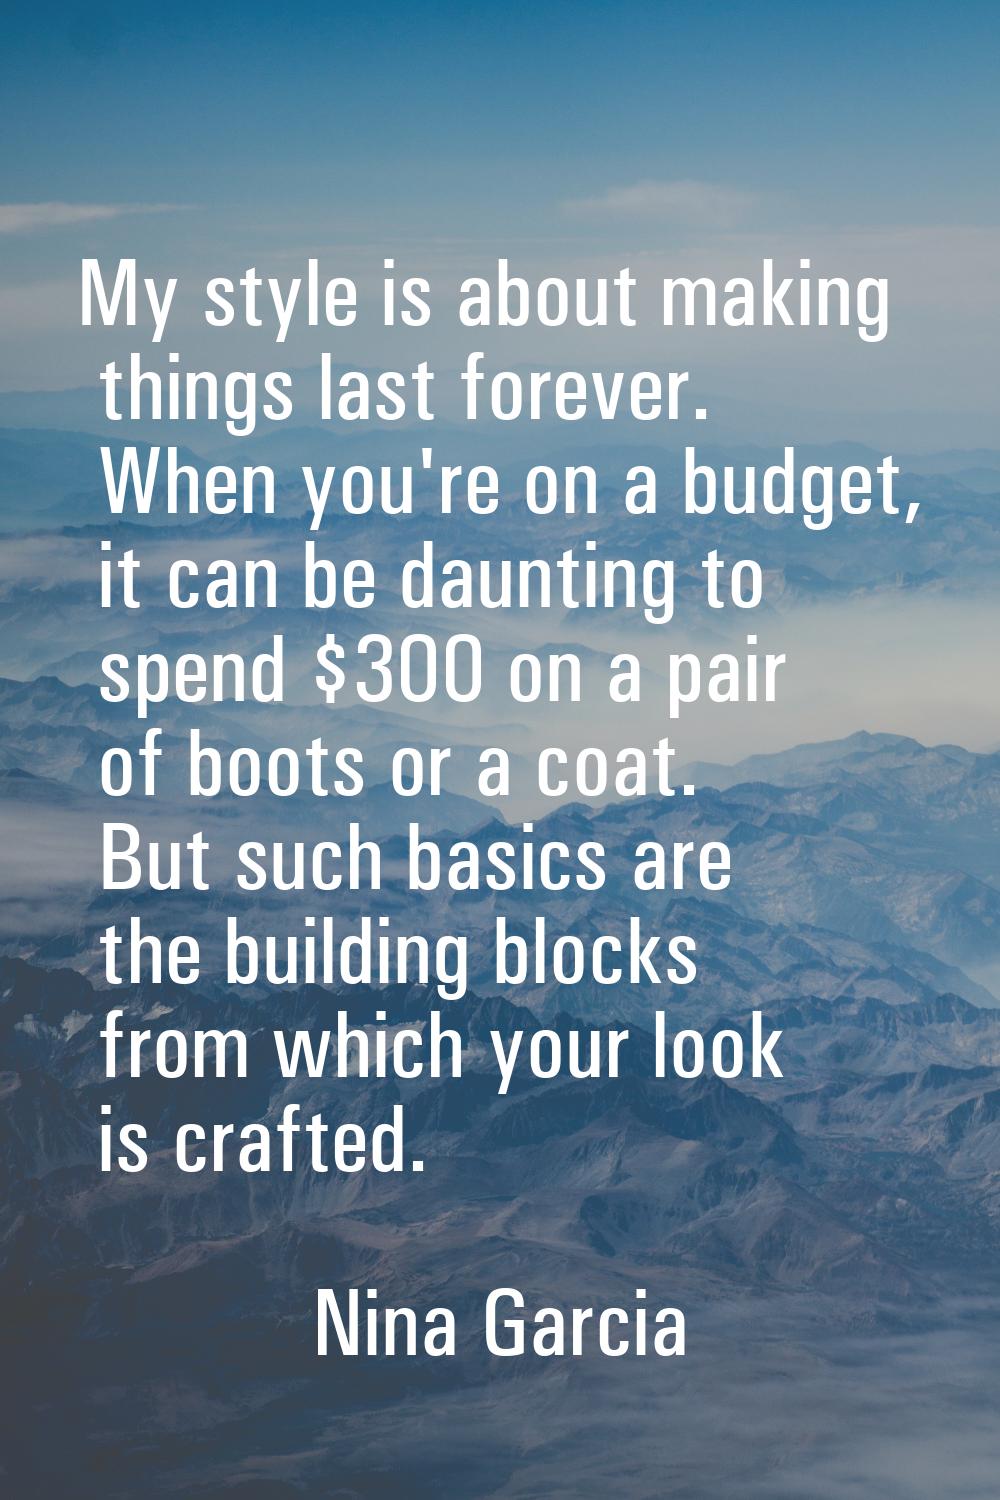 My style is about making things last forever. When you're on a budget, it can be daunting to spend 